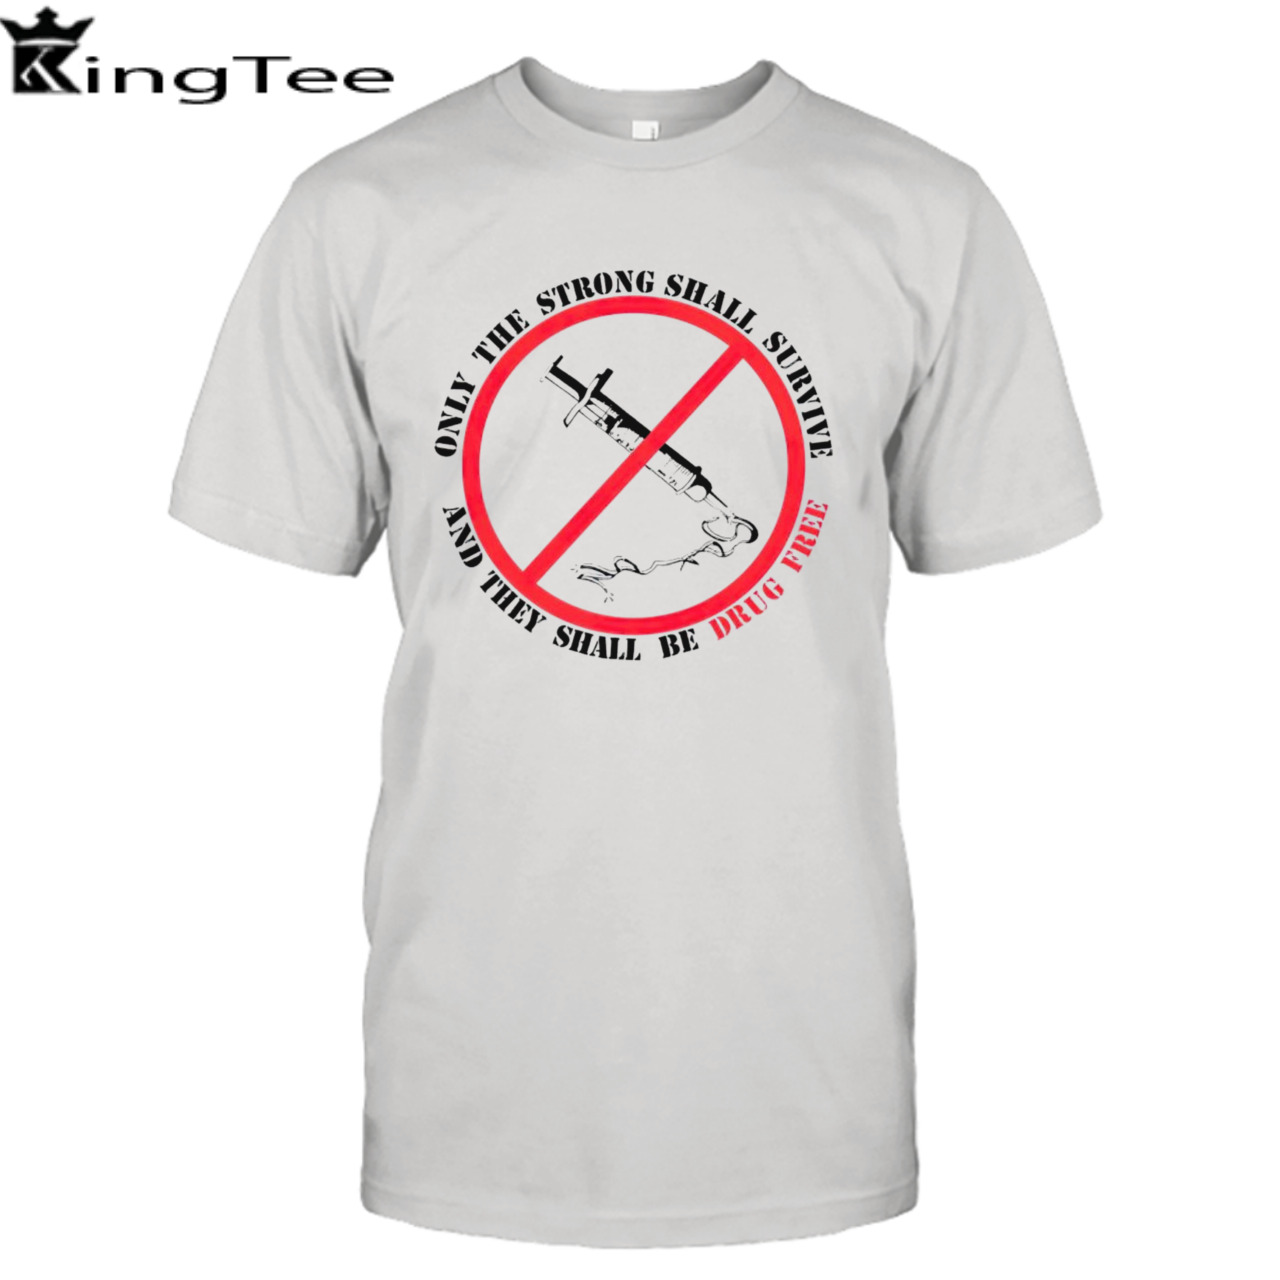 Only the strong shall survive and they shall be drug free shirt